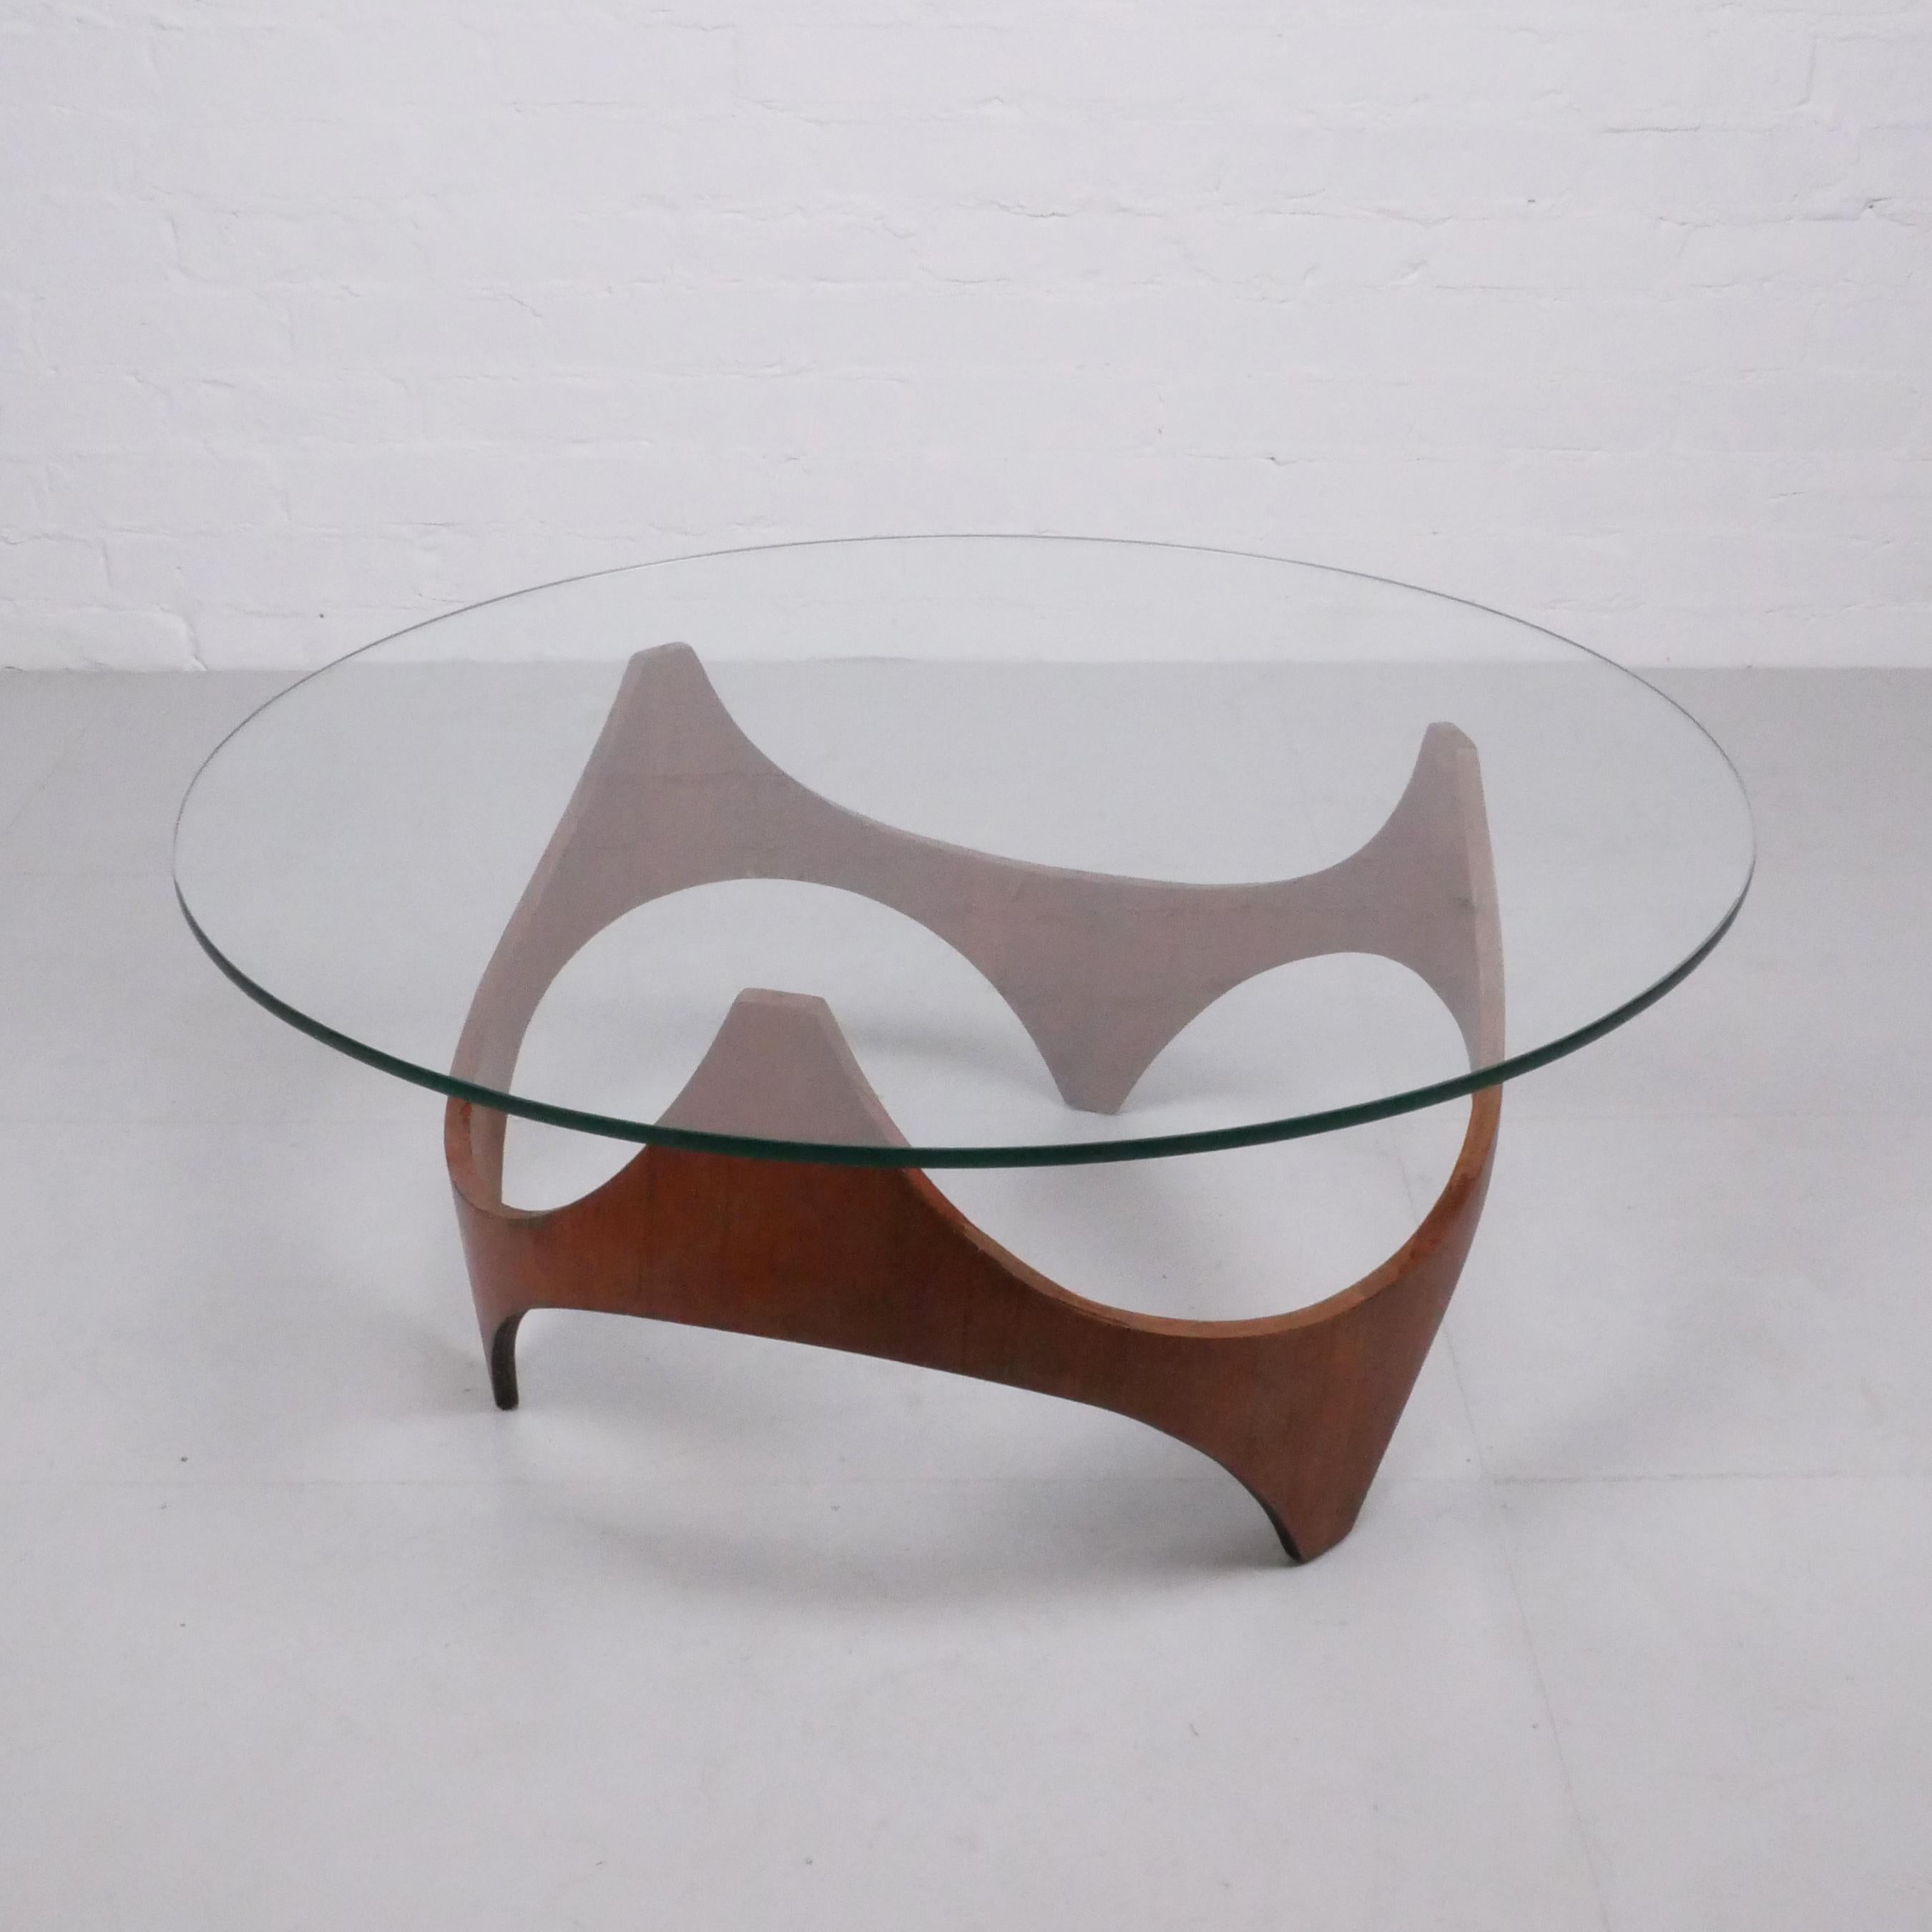 Henry P Glass (Designer), Austria/USA (attributed to / in the style of)
Coffee table, c. 1960

Teak veneered plywood, glass top.

Stunning, dynamic low table. The design is sometimes attributed to the Austrian/American architect/designer Henry